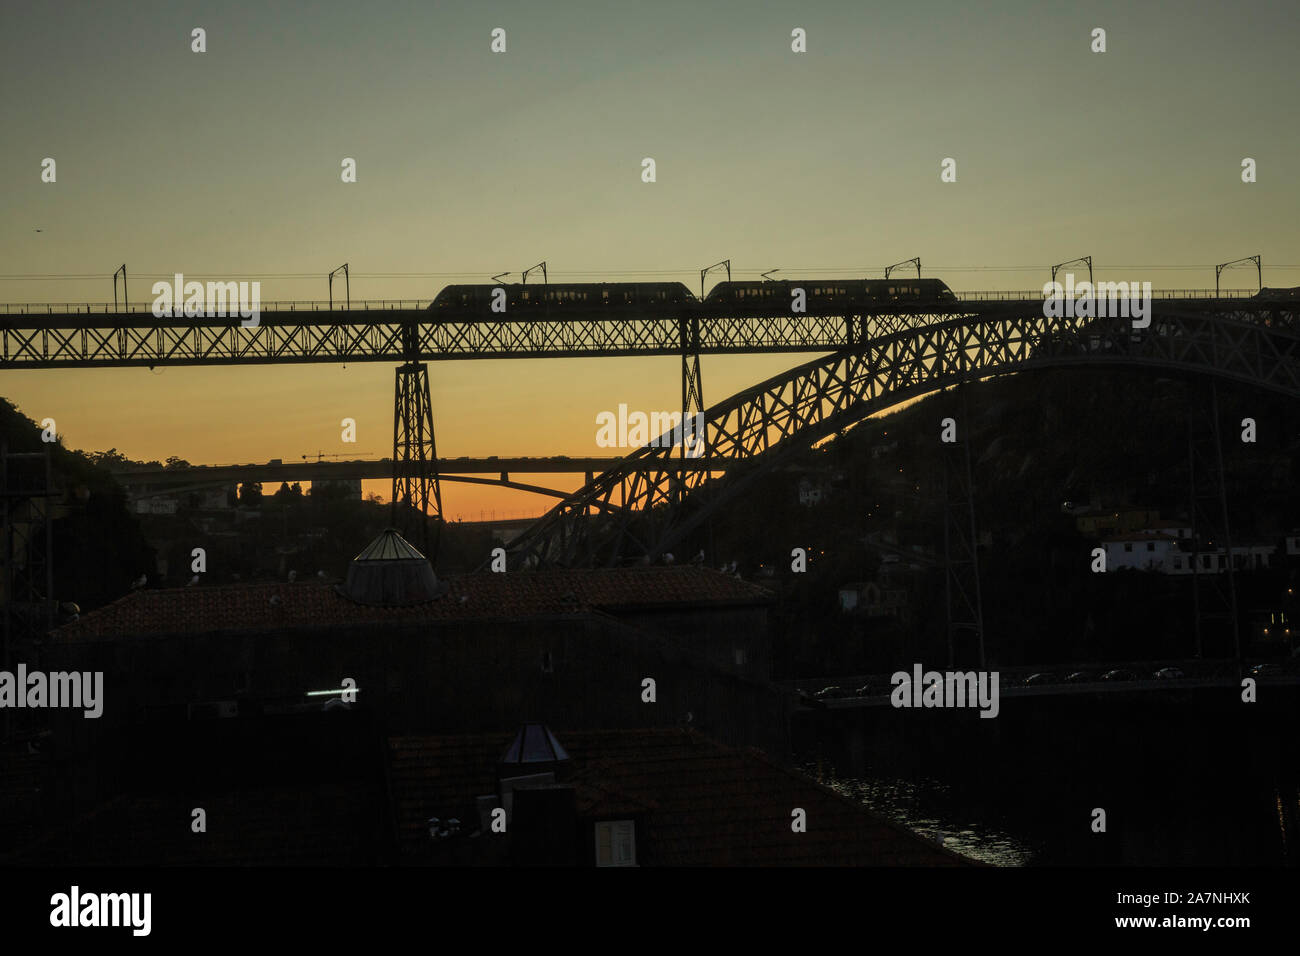 A new dawn creates striking silhouettes of bridges on which trains and cars move, the bridges spanning a river valley and river. Stock Photo